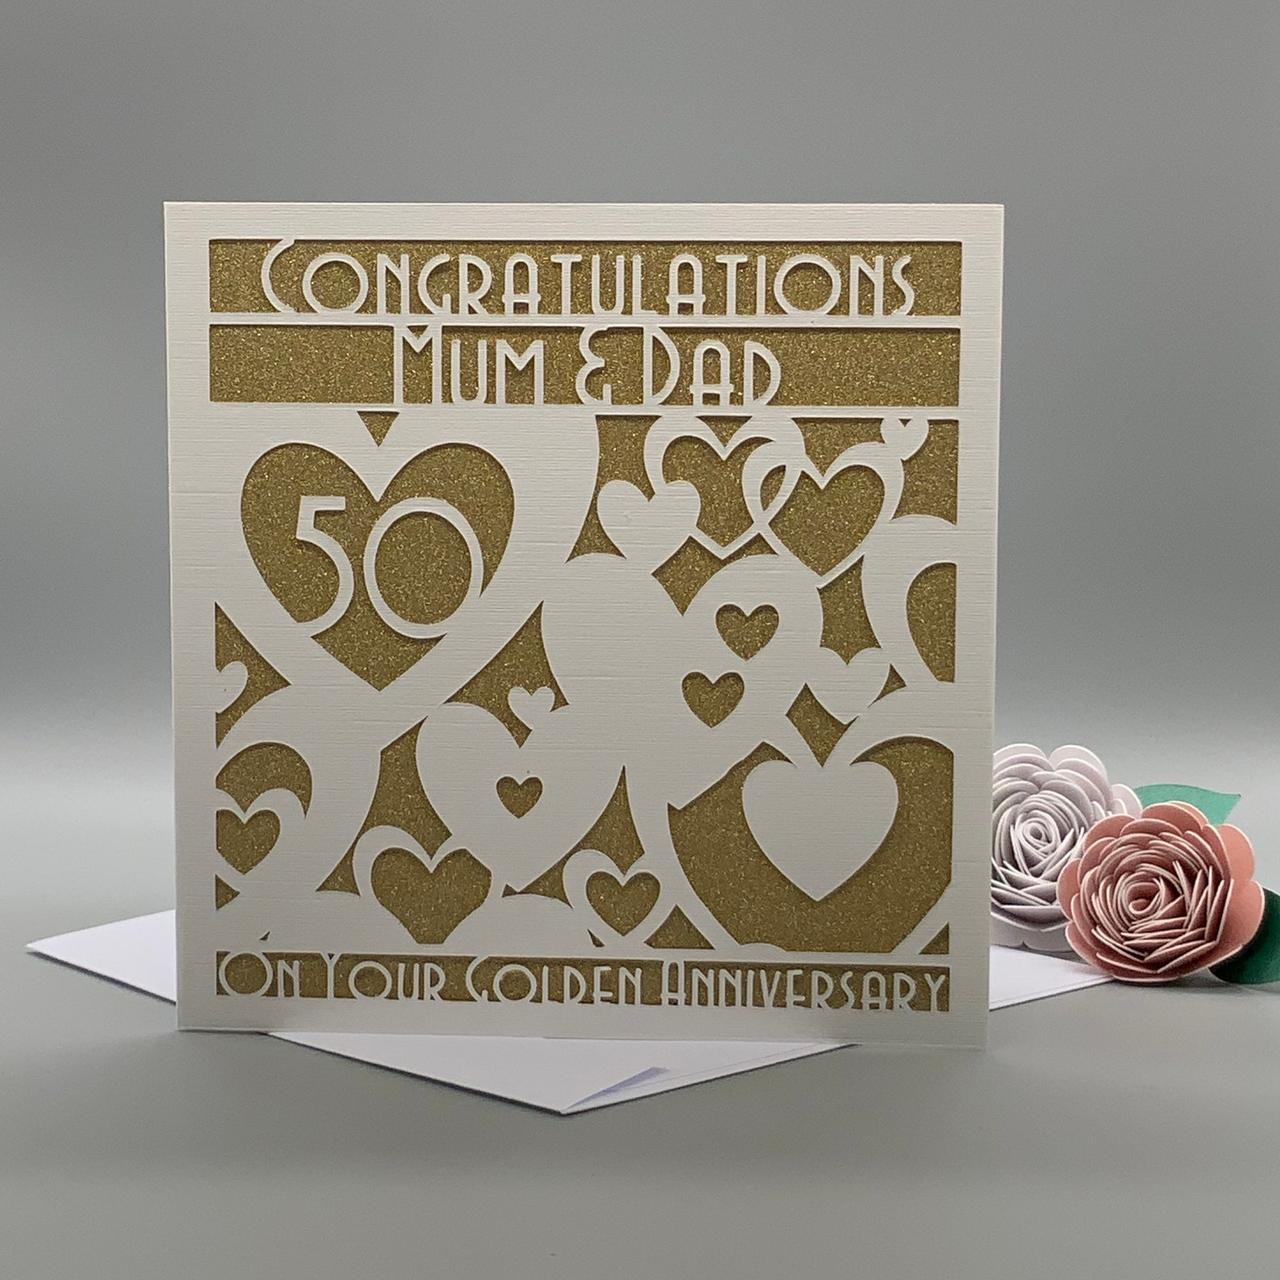 WEDDING ANNIVERSARY CARDS PERSONALISED HUSBAND WIFE 1 25 30 40 50 60 70 CONGRATS